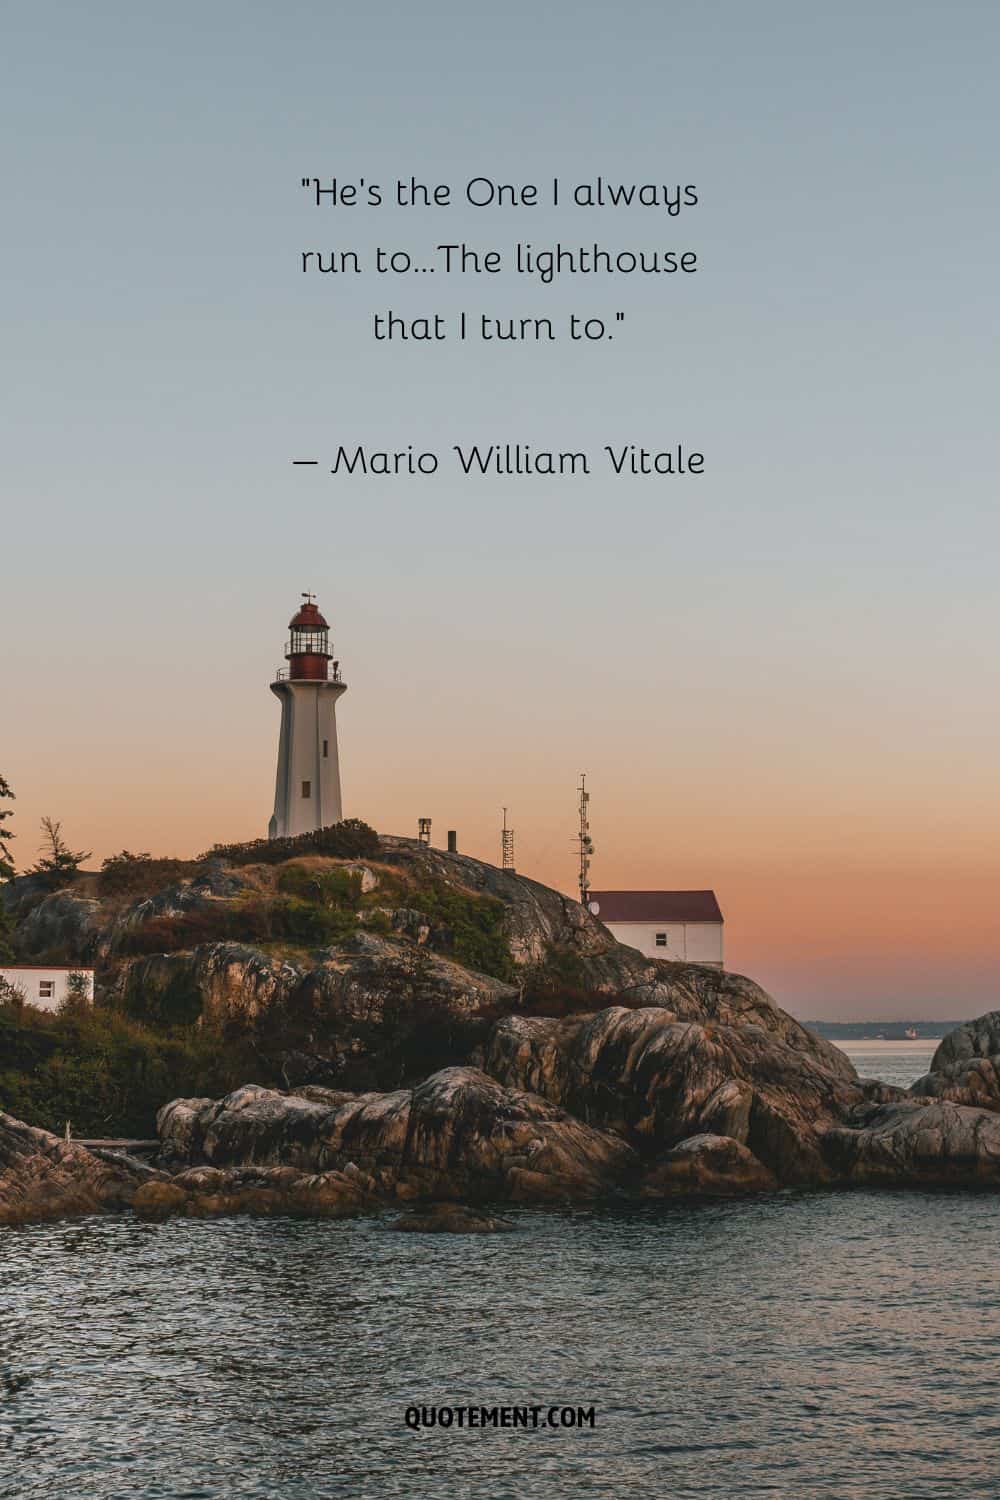 Inspiring quote by Mario William Vitale and a lighthouse in the sunset